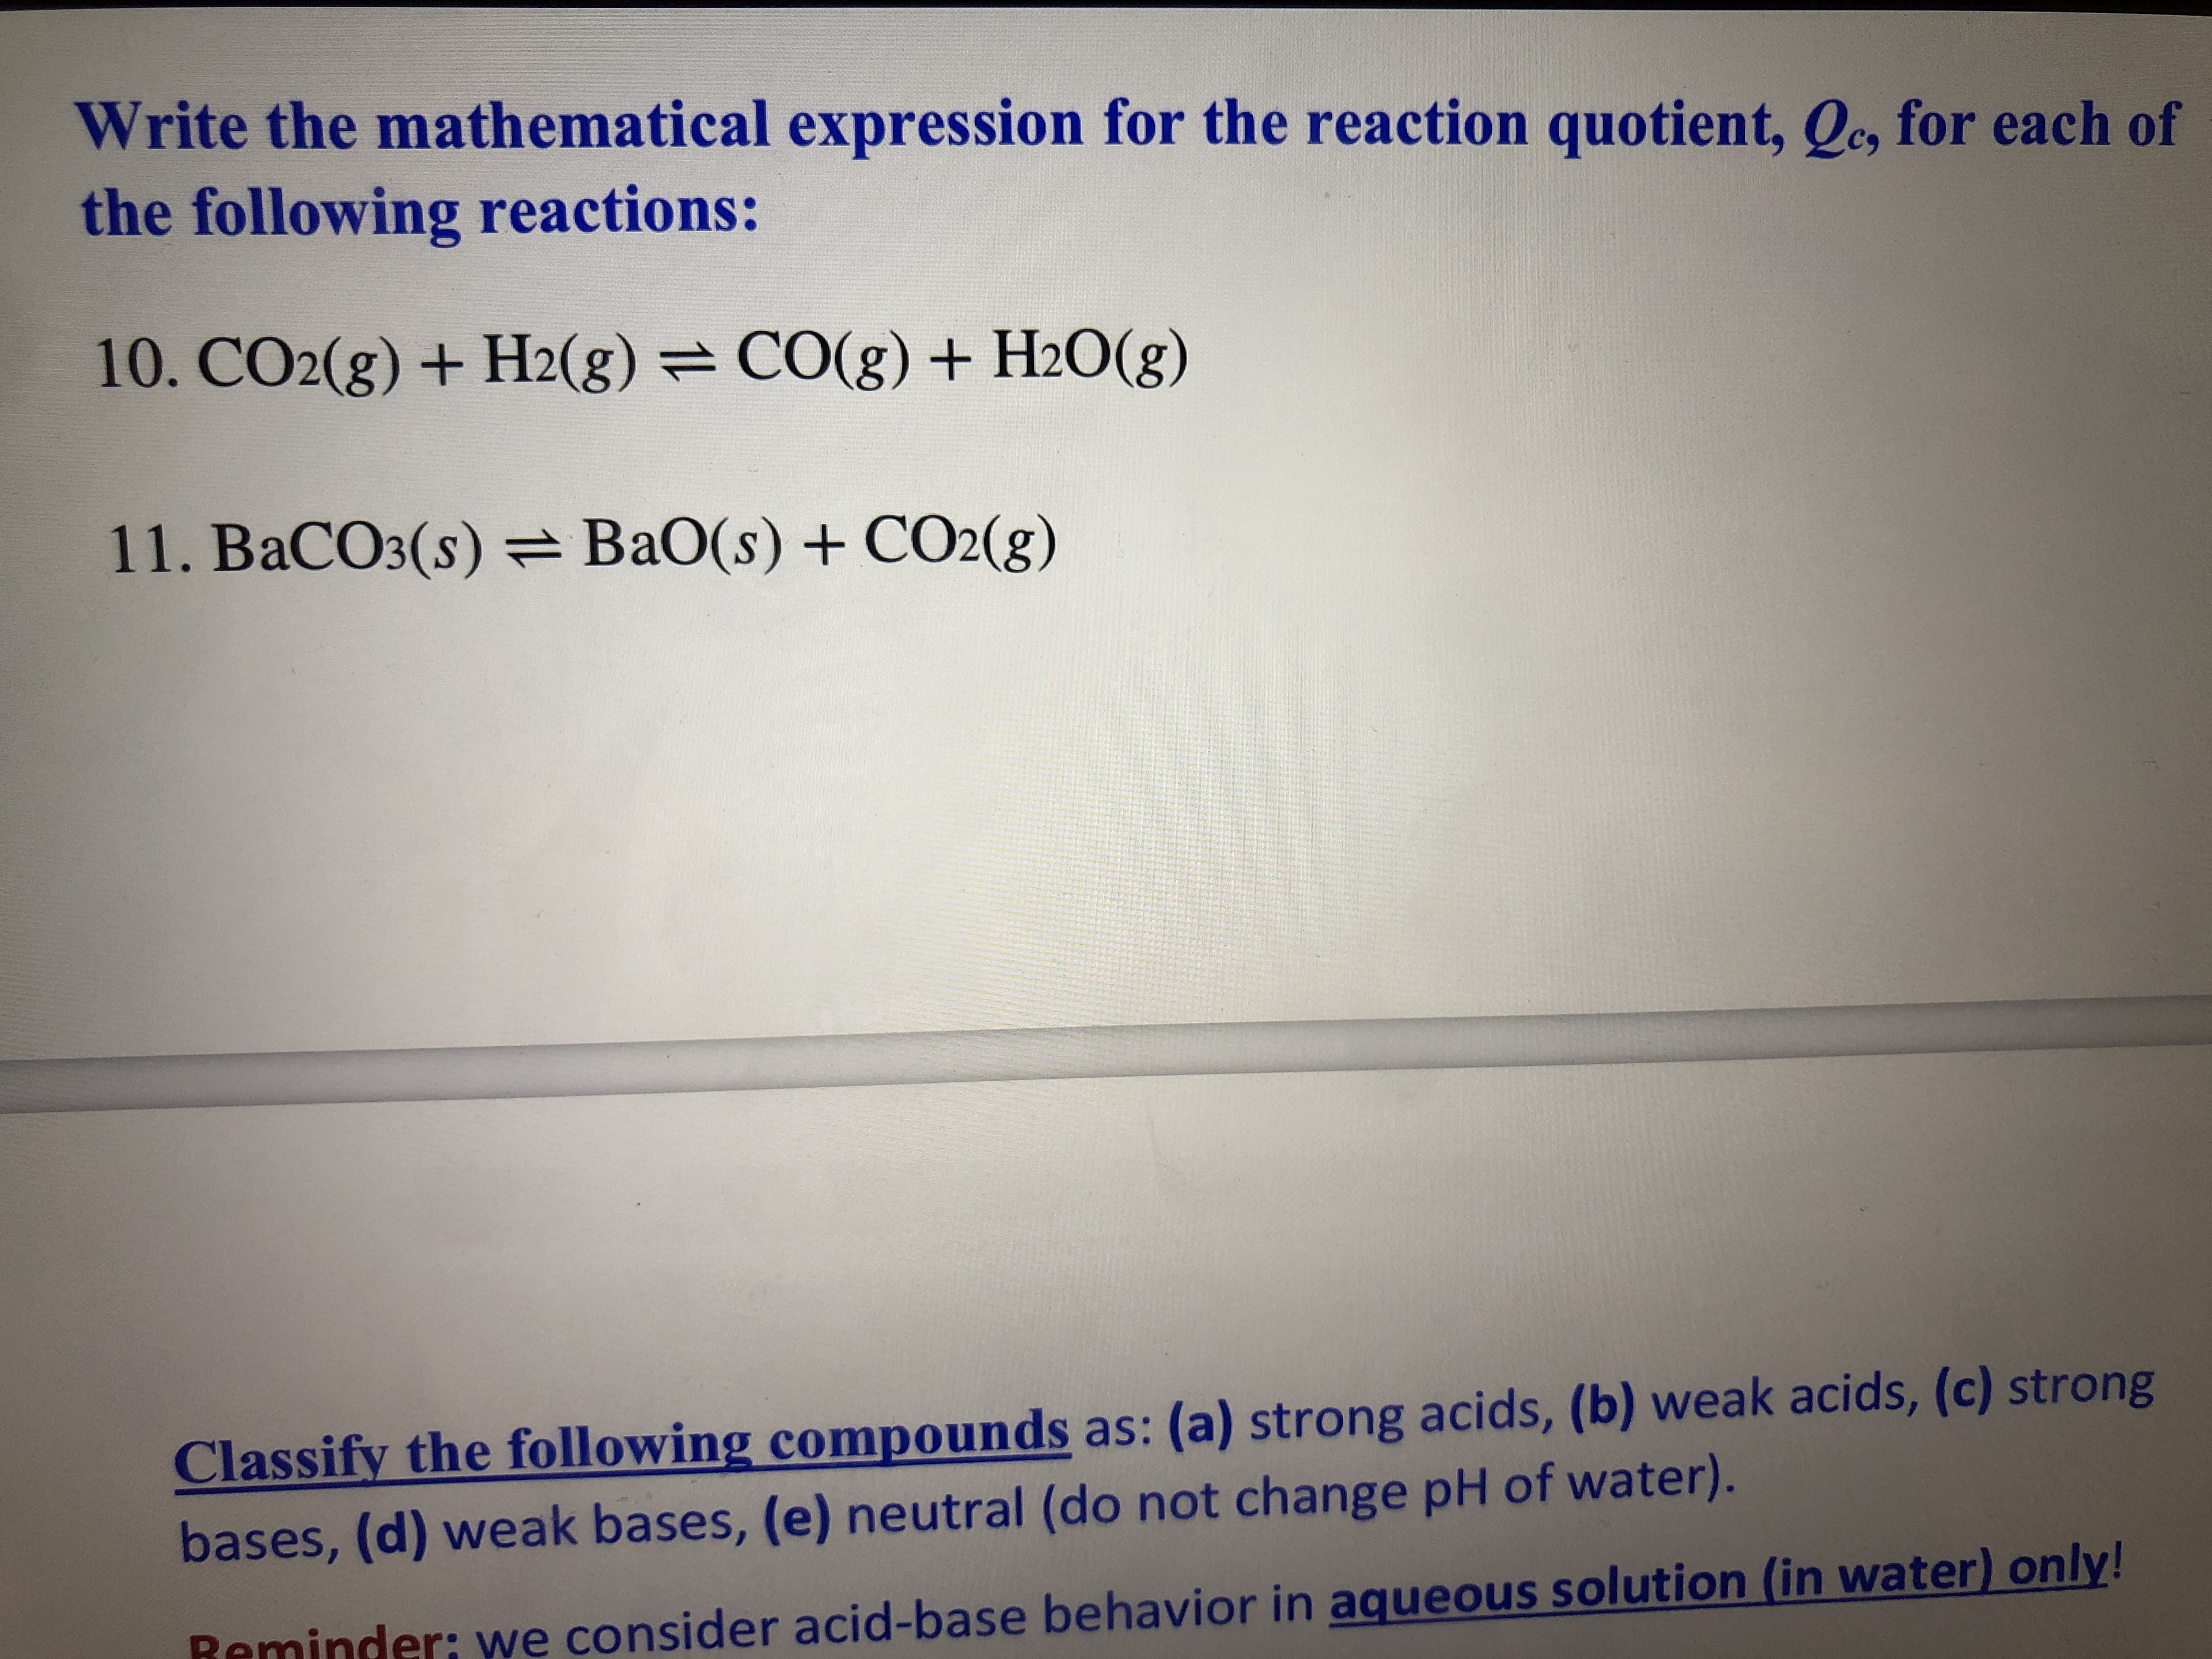 Write the mathematical expression for the reaction quotient, Qe, for each of
the following reactions:
10. CO2(g) + H2(g) = CO(g) + H2O(g)
11. BaCO3(s) =BaO(s) + CO2(g)
